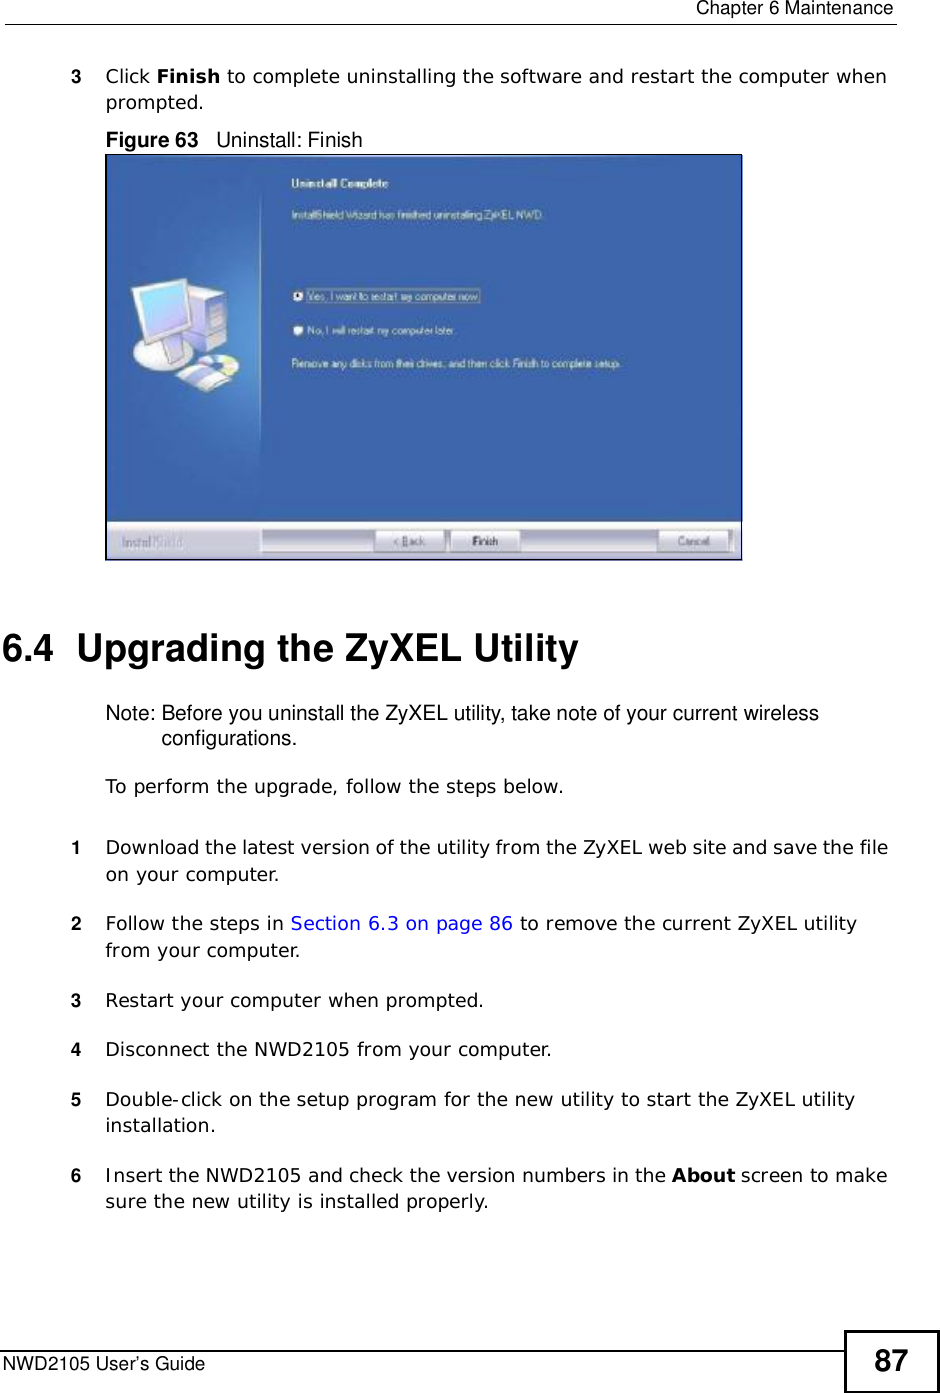  Chapter 6MaintenanceNWD2105 User’s Guide 873Click Finish to complete uninstalling the software and restart the computer when prompted.Figure 63   Uninstall: Finish 6.4  Upgrading the ZyXEL UtilityNote: Before you uninstall the ZyXEL utility, take note of your current wireless configurations.To perform the upgrade, follow the steps below.1Download the latest version of the utility from the ZyXEL web site and save the file on your computer.2Follow the steps in Section 6.3 on page 86 to remove the current ZyXEL utility from your computer.3Restart your computer when prompted.4Disconnect the NWD2105 from your computer.5Double-click on the setup program for the new utility to start the ZyXEL utility installation.6Insert the NWD2105 and check the version numbers in the About screen to make sure the new utility is installed properly.